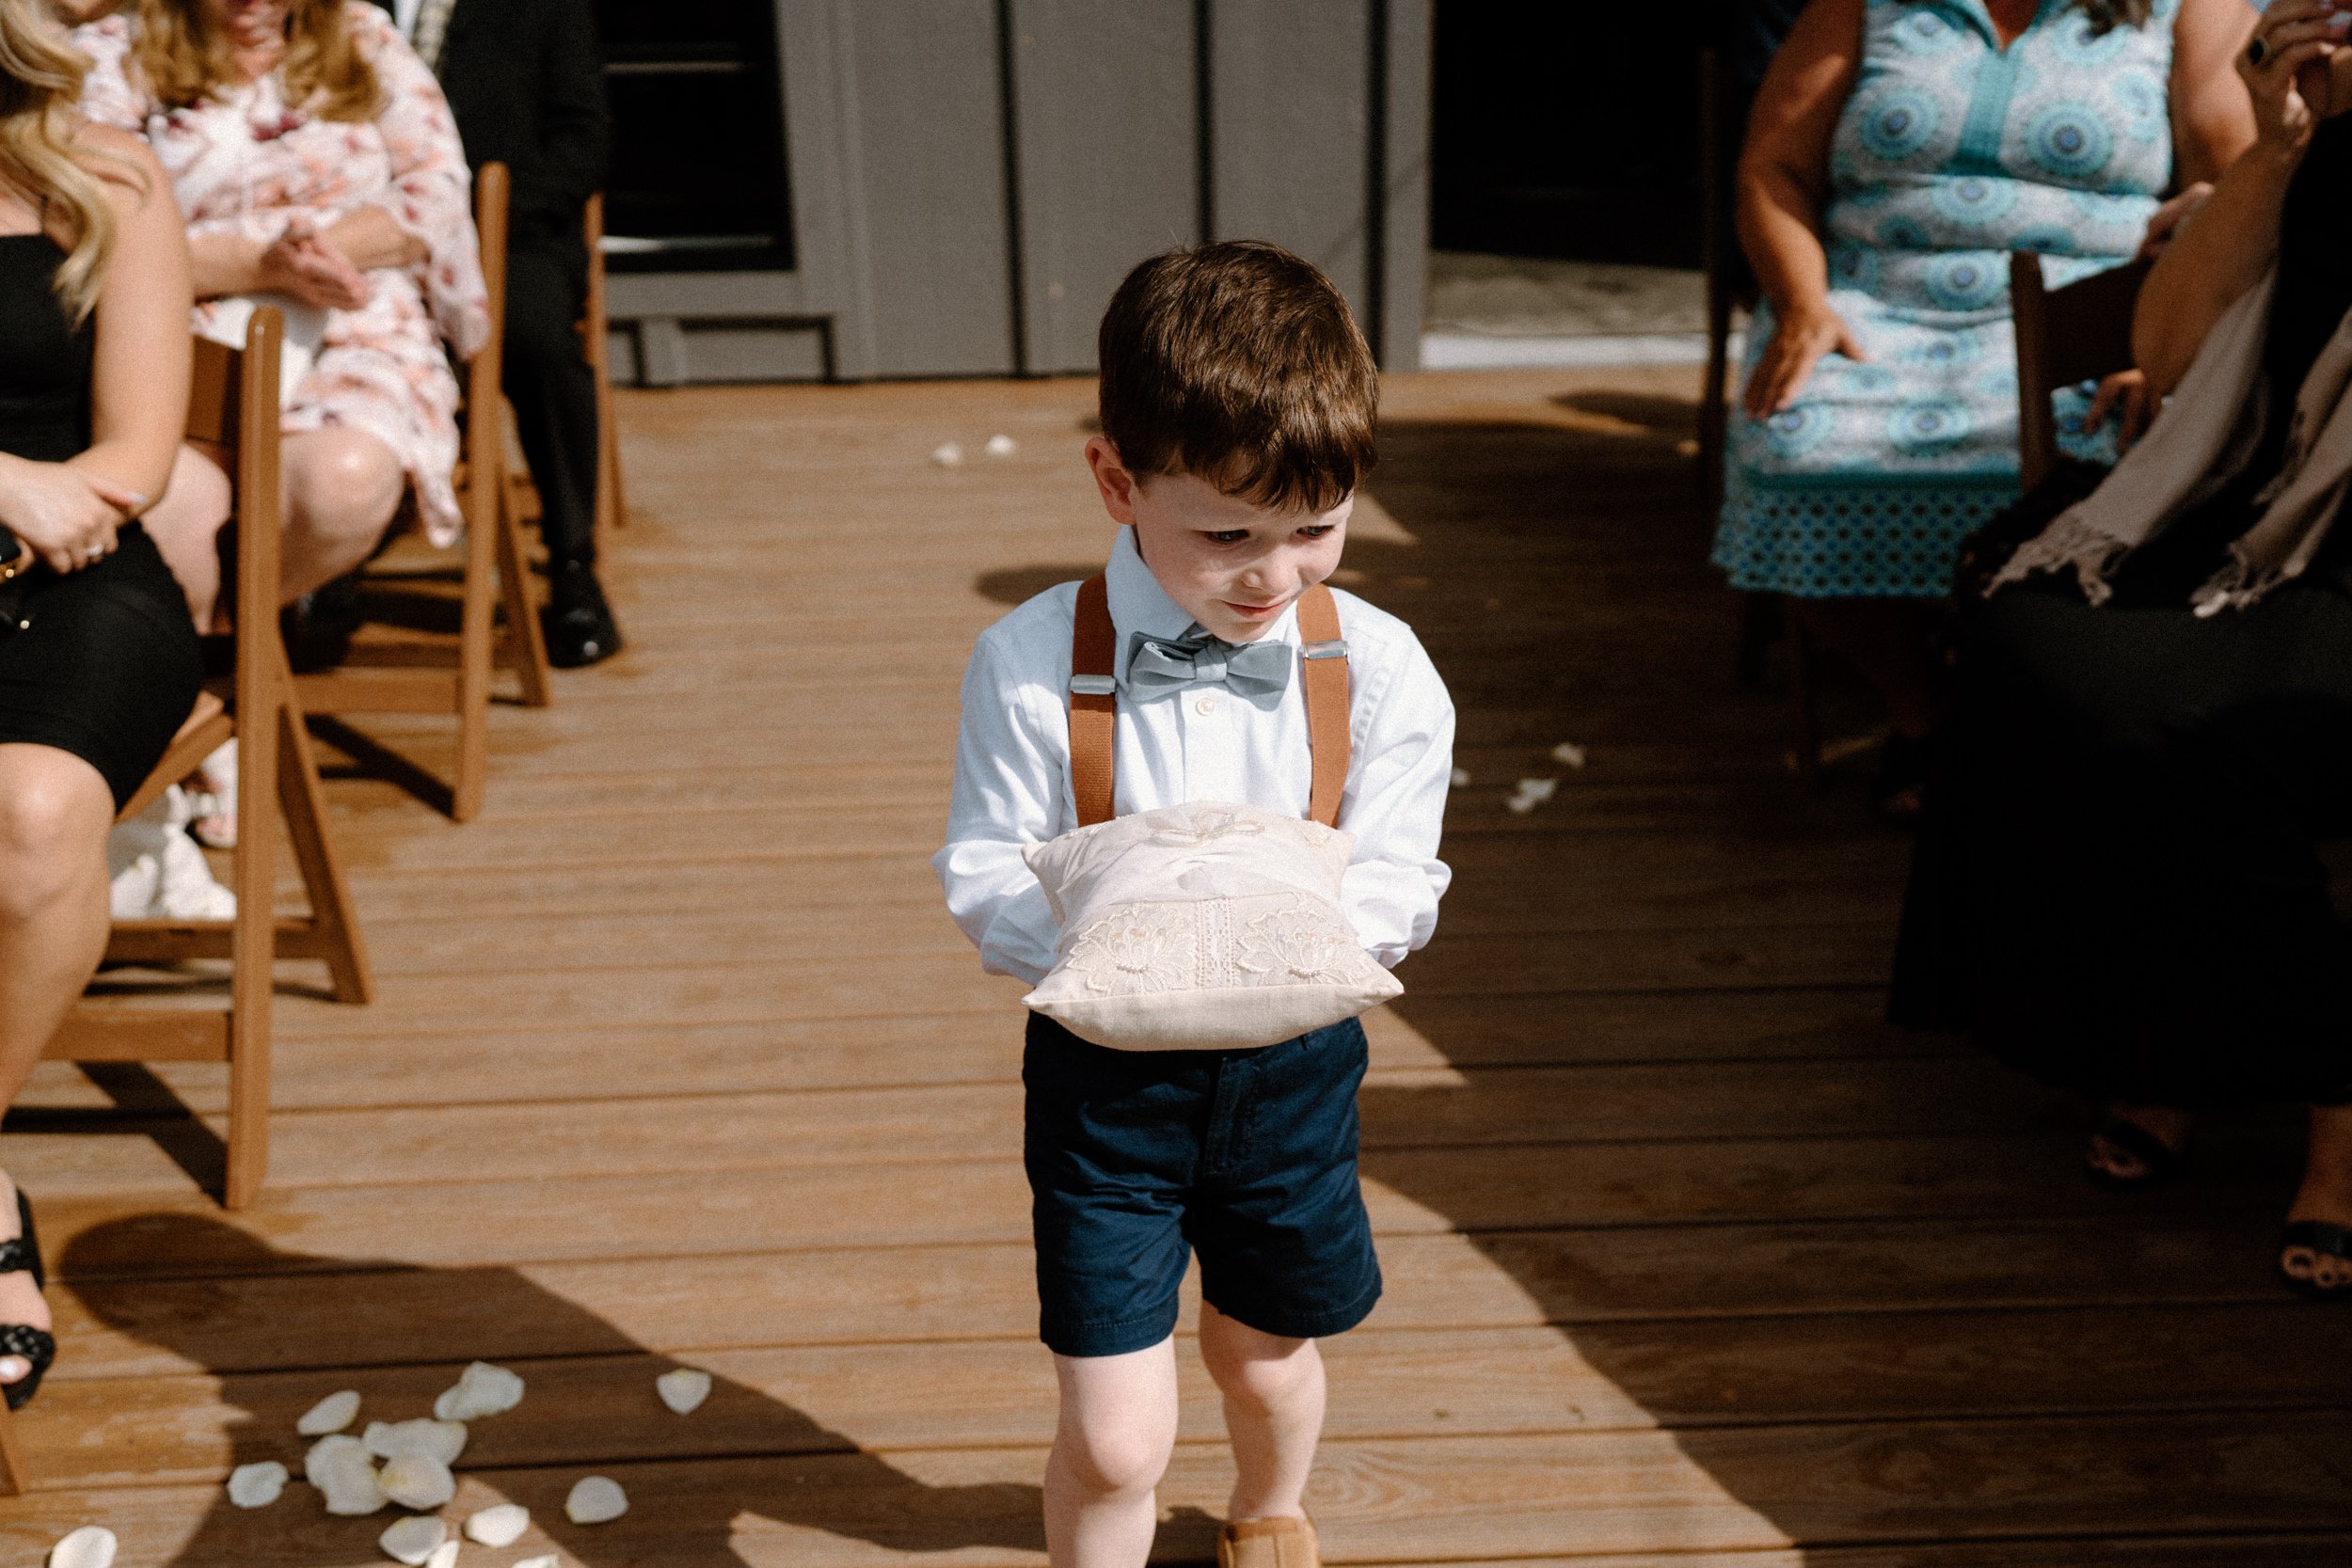 A young ring bearer walks down the aisle holding a pillow with the rings